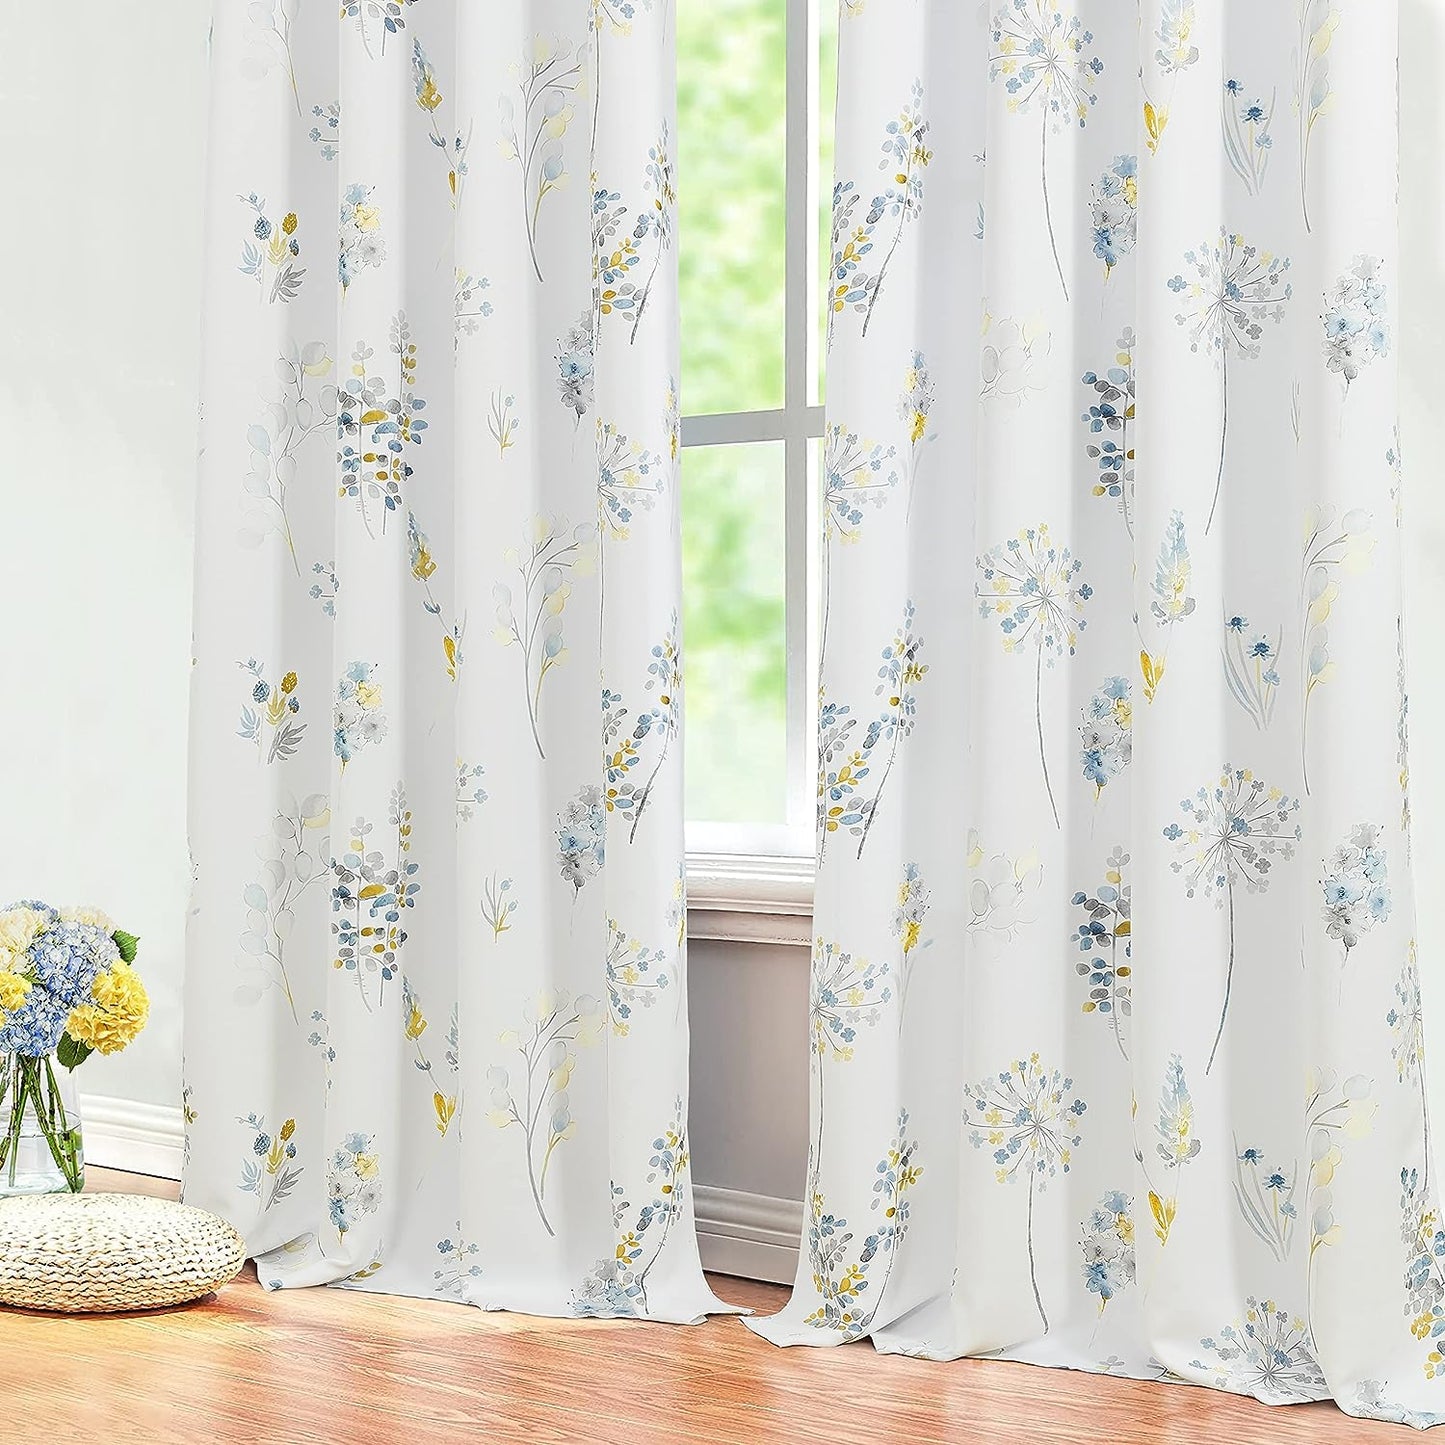 XTMYI 63 Inch Length Sage Green Window Curtains for Bedroom 2 Panels,Room Darkening Watercolor Floral Leaves 80% Blackout Flowered Printed Curtains for Living Room with Grommet,1 Pair Set  XTMYI Yellow  Blue  Grey 52"X84" 